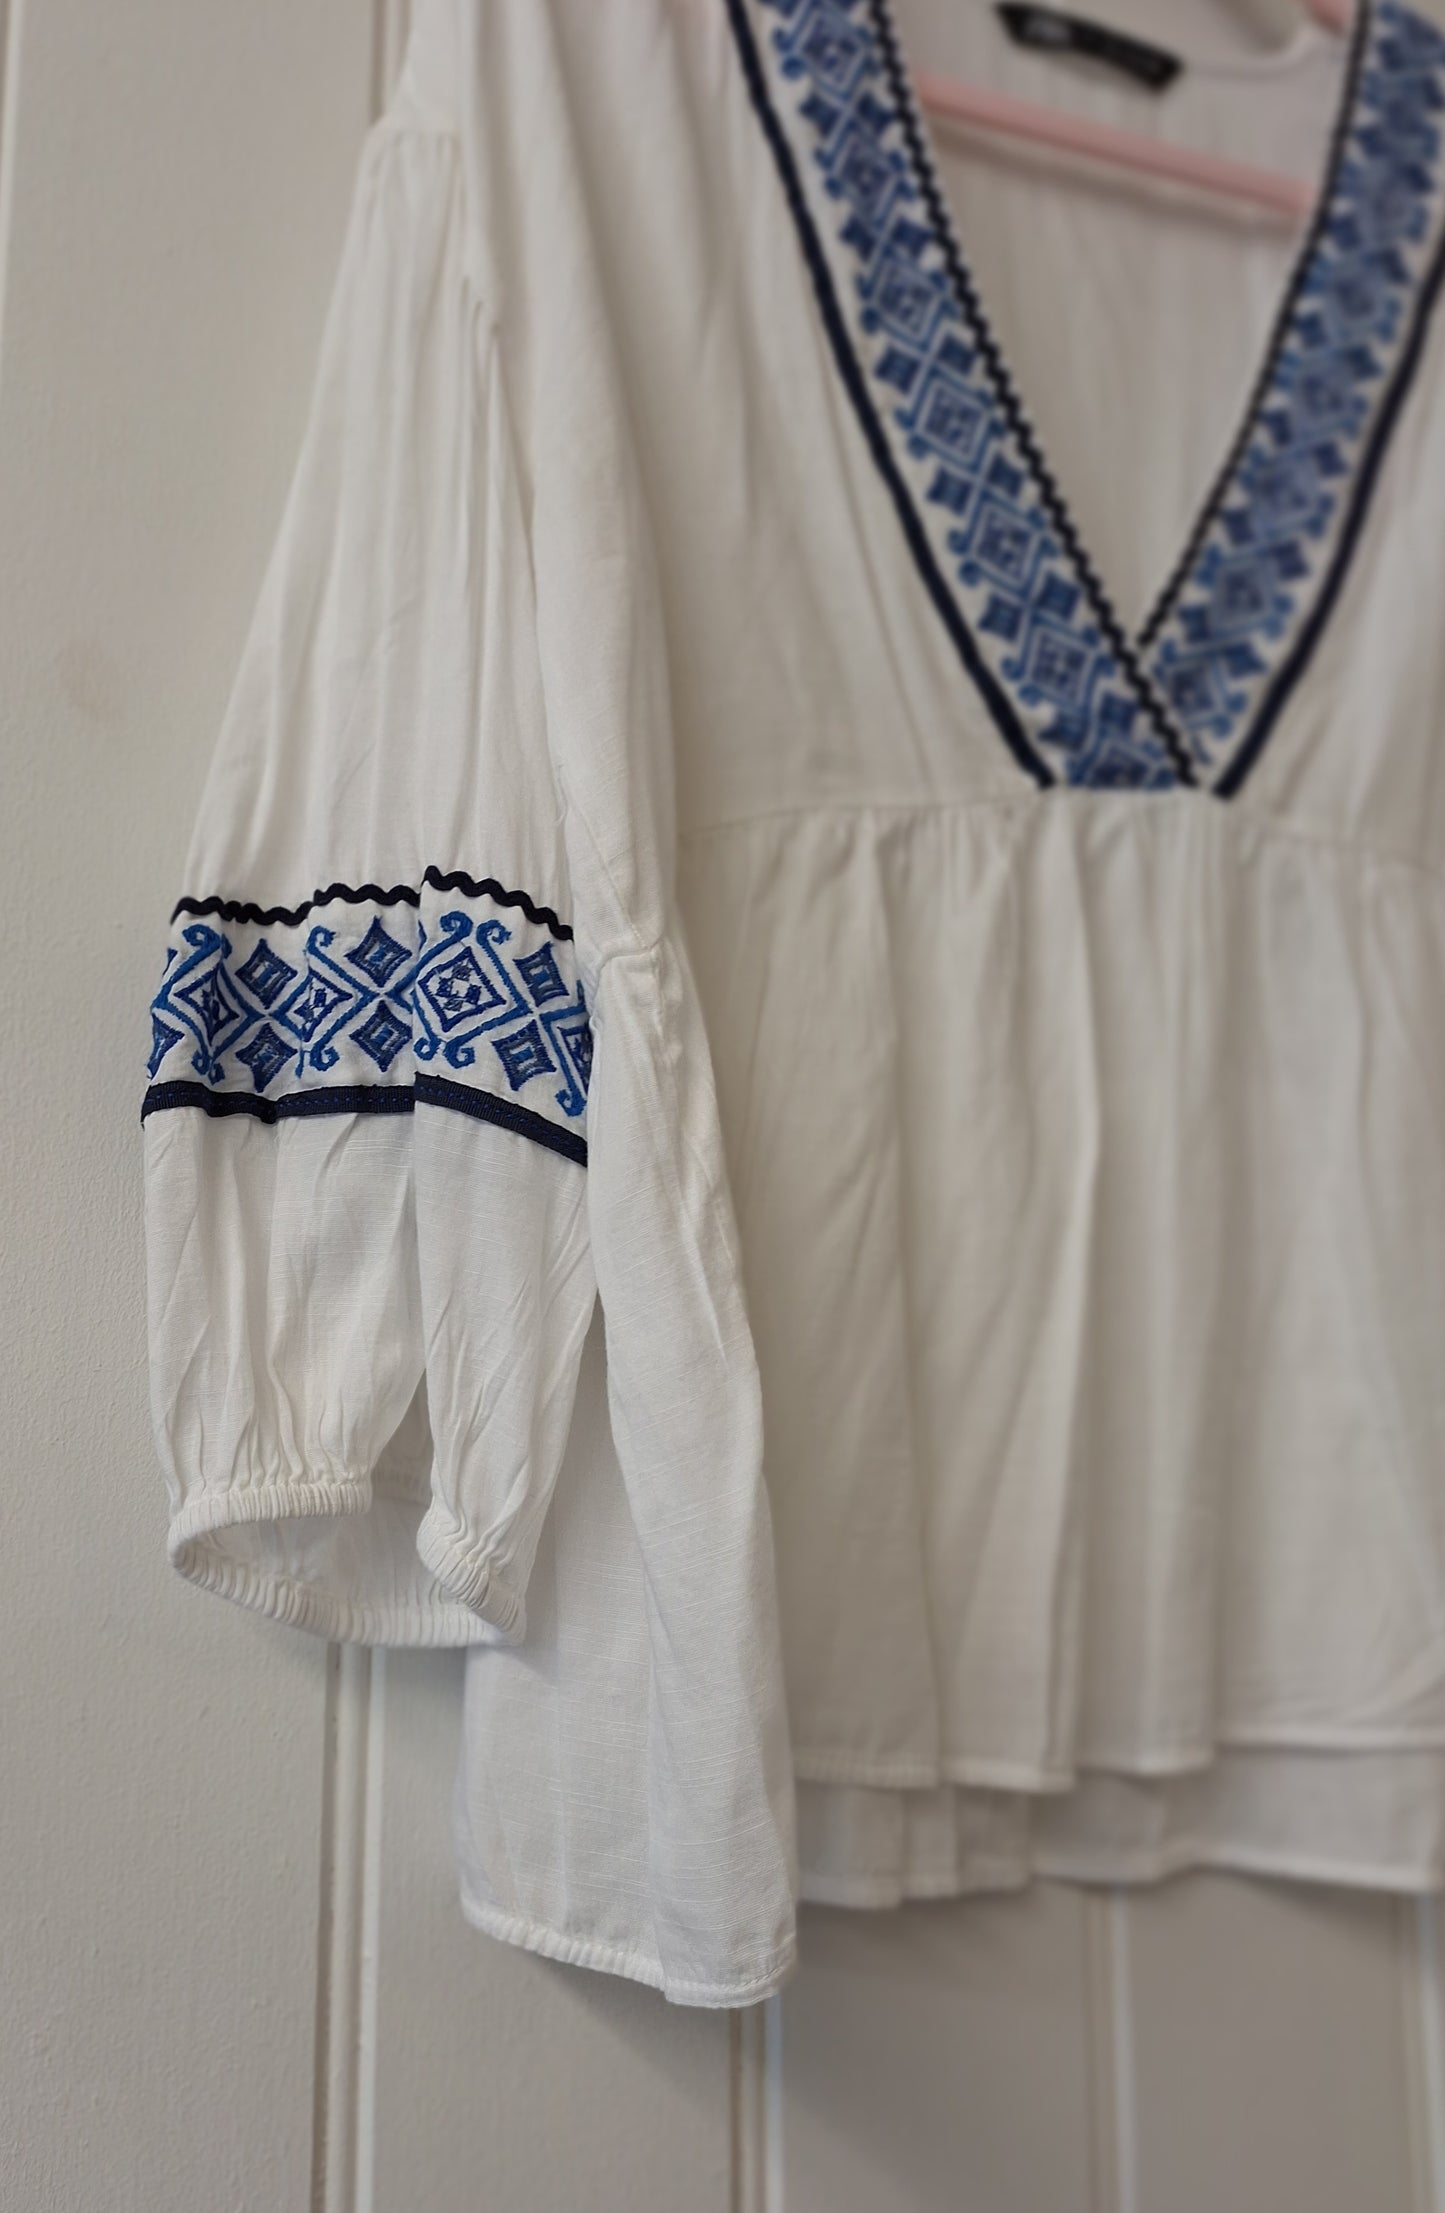 ZARA white and blue embroidered top L